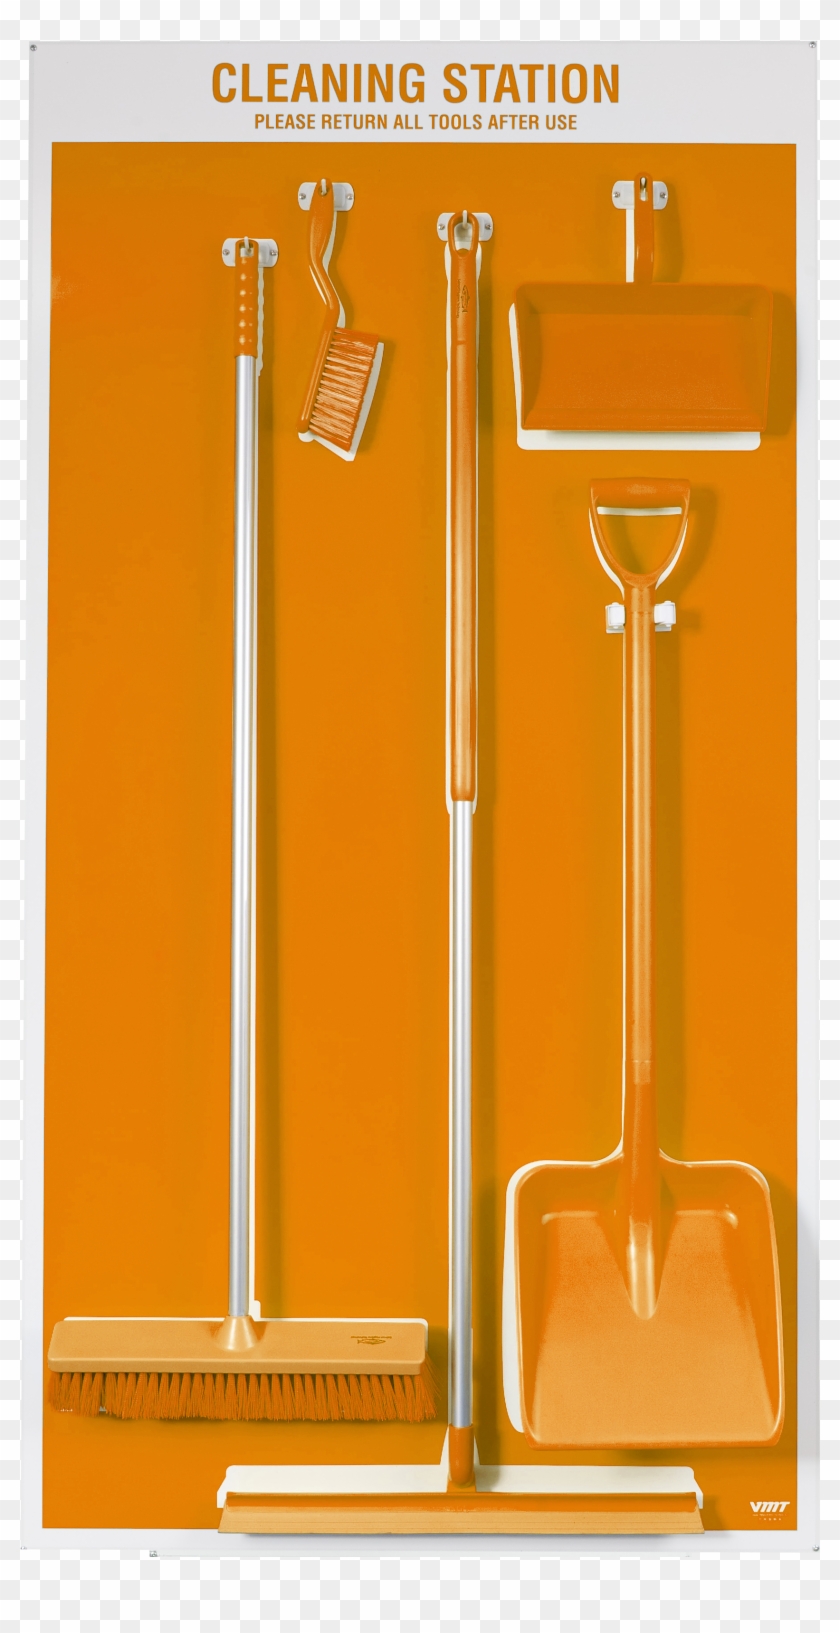 Orange Cleaning Station With Tools - Cleaning Station #1187184